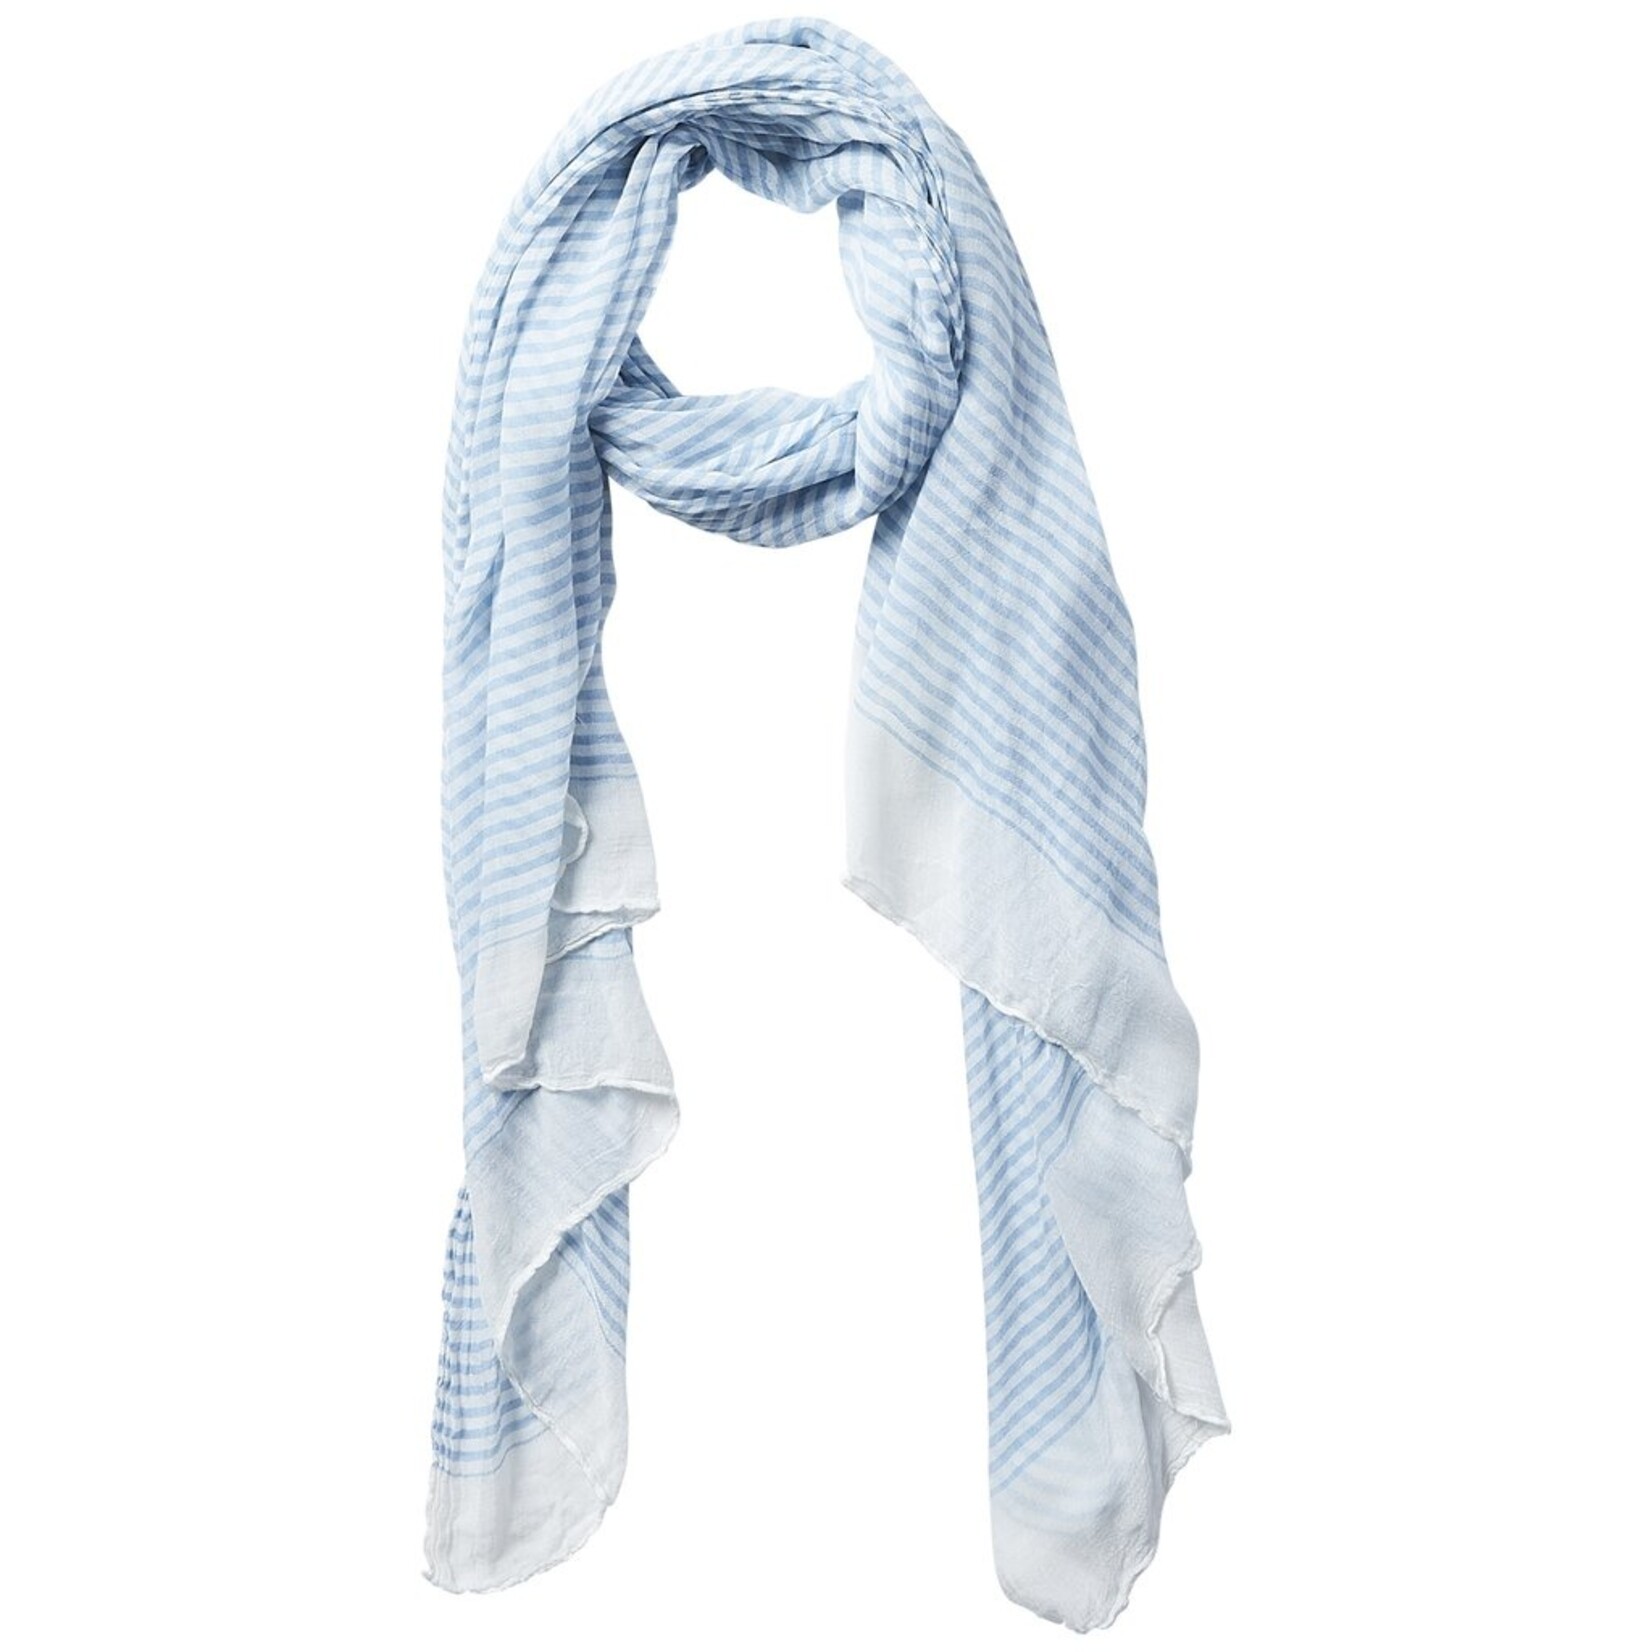 Hadley Wren - Insect Shield Scarf - Blue Tiny Stripe